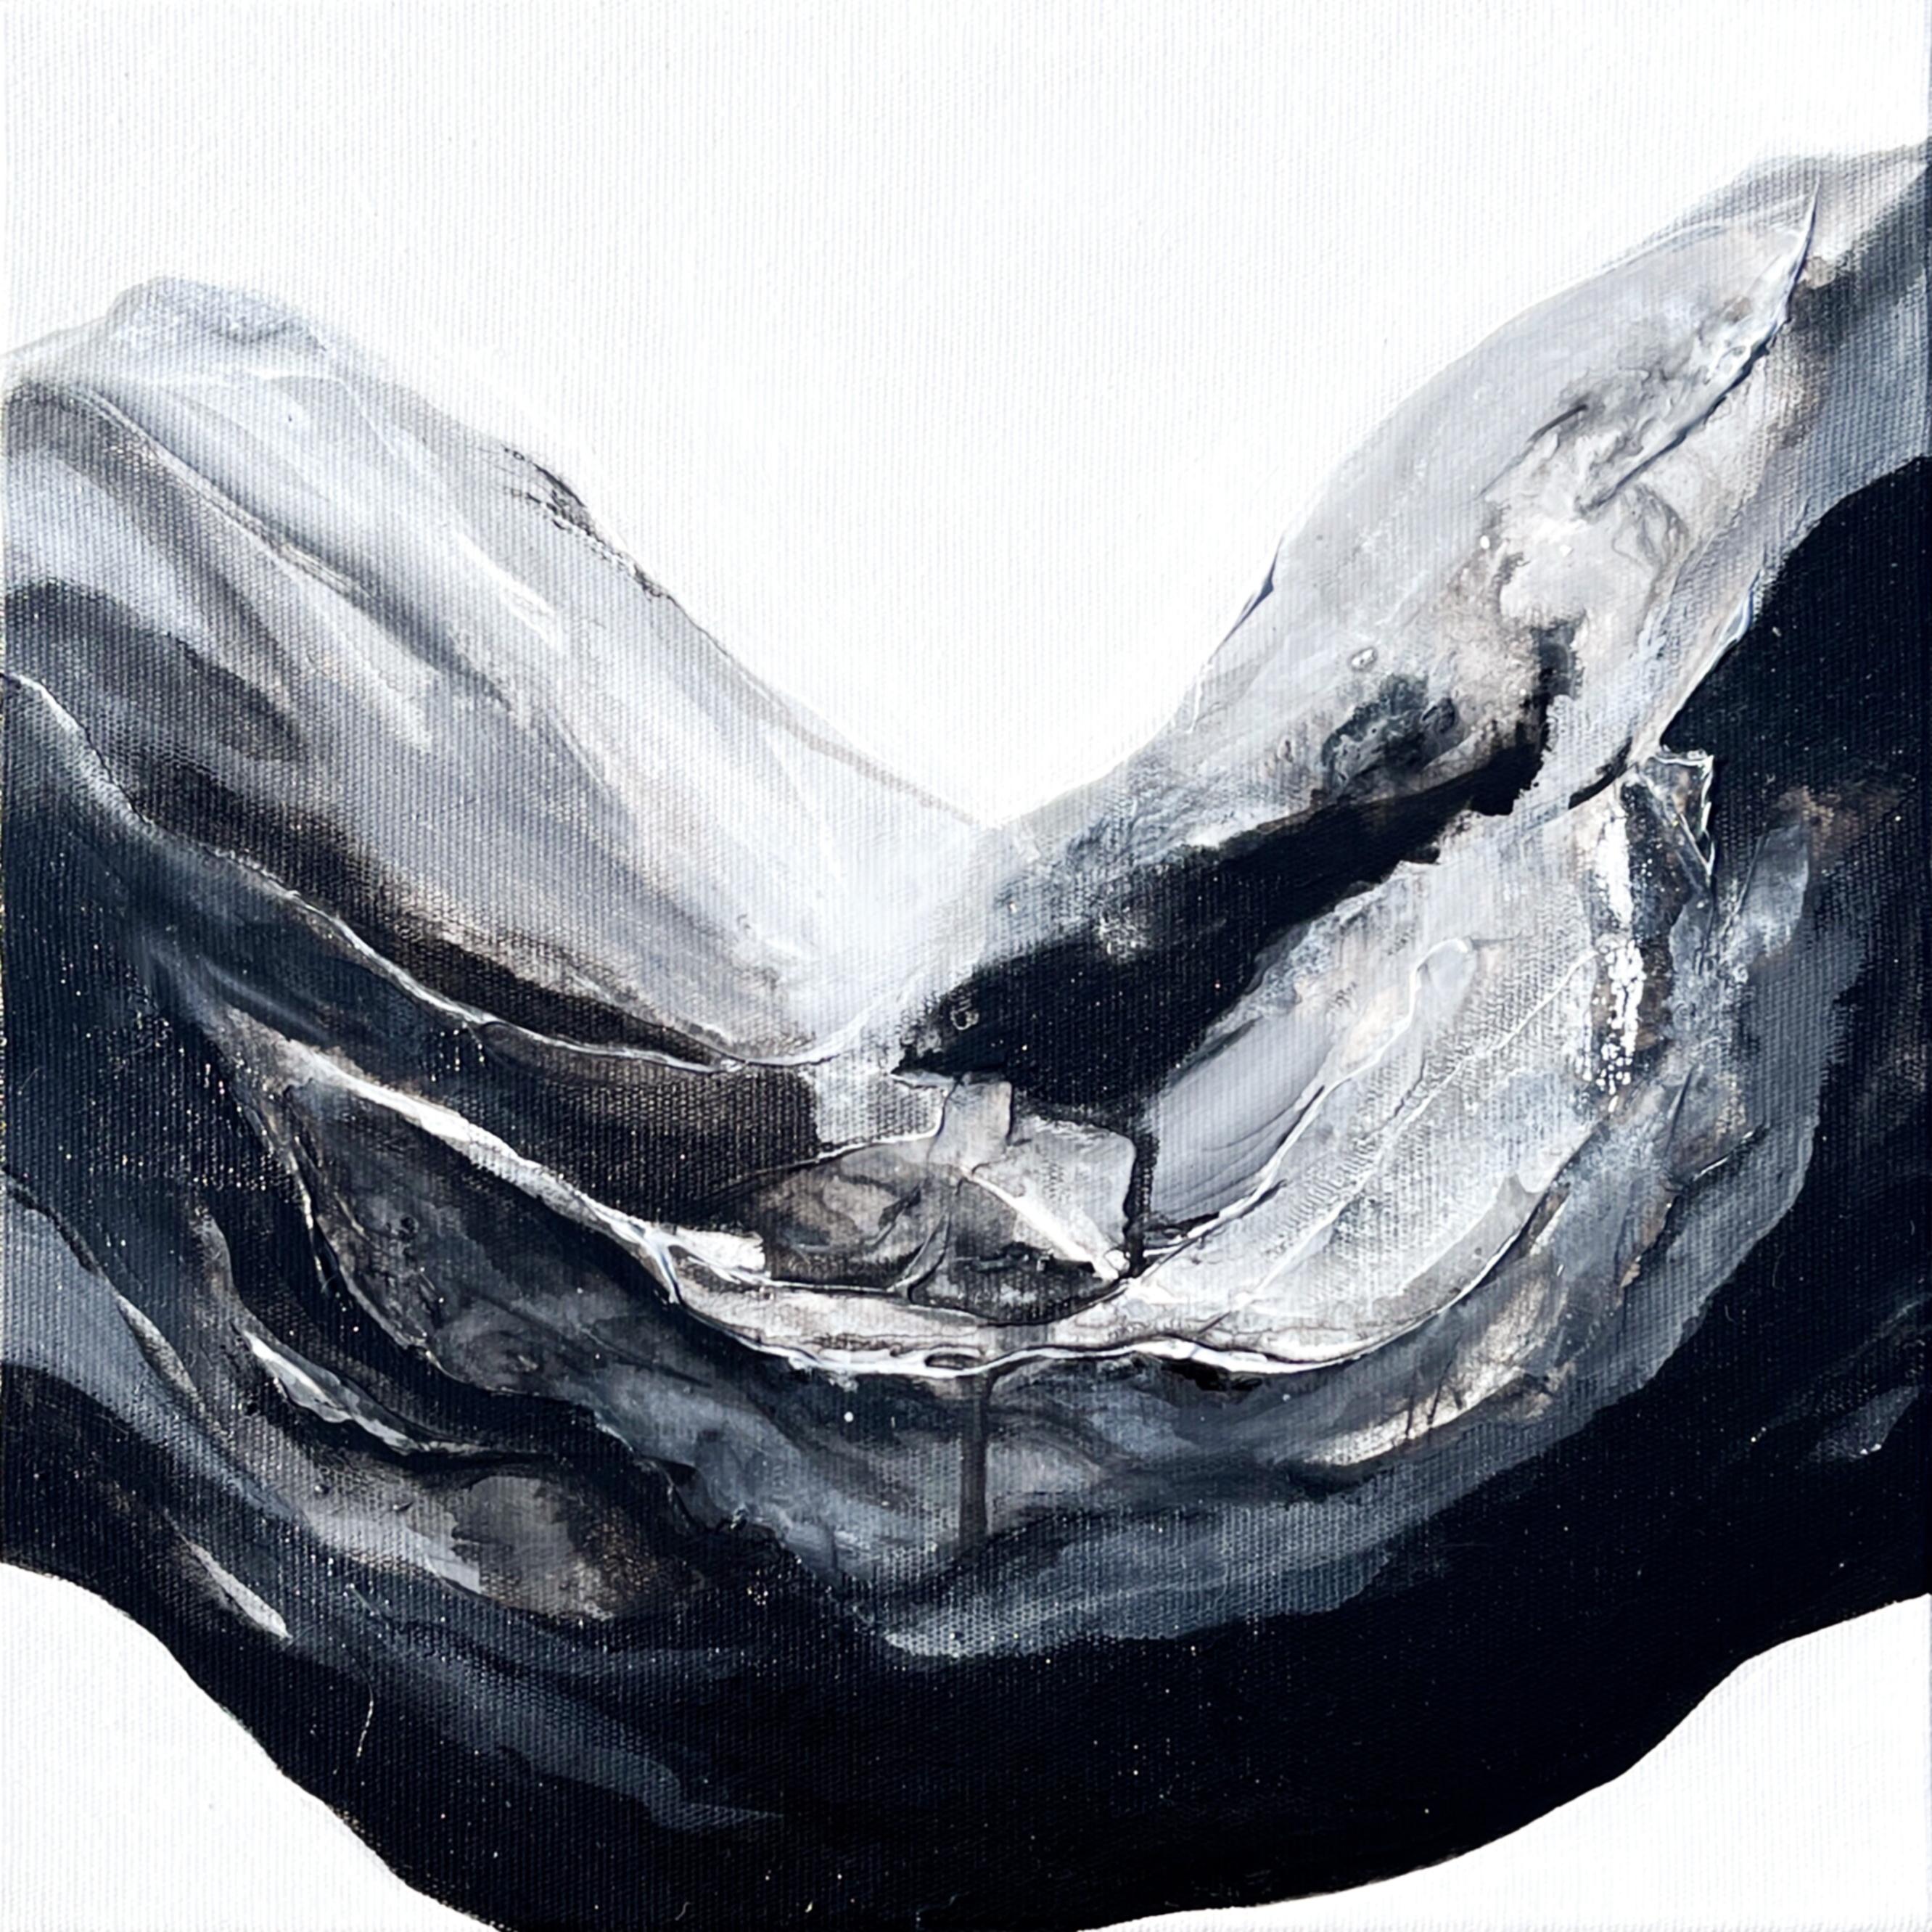 Lesia Danilina Interior Painting - "When I was falling and you caught me" abstract, black and white, minimalist art